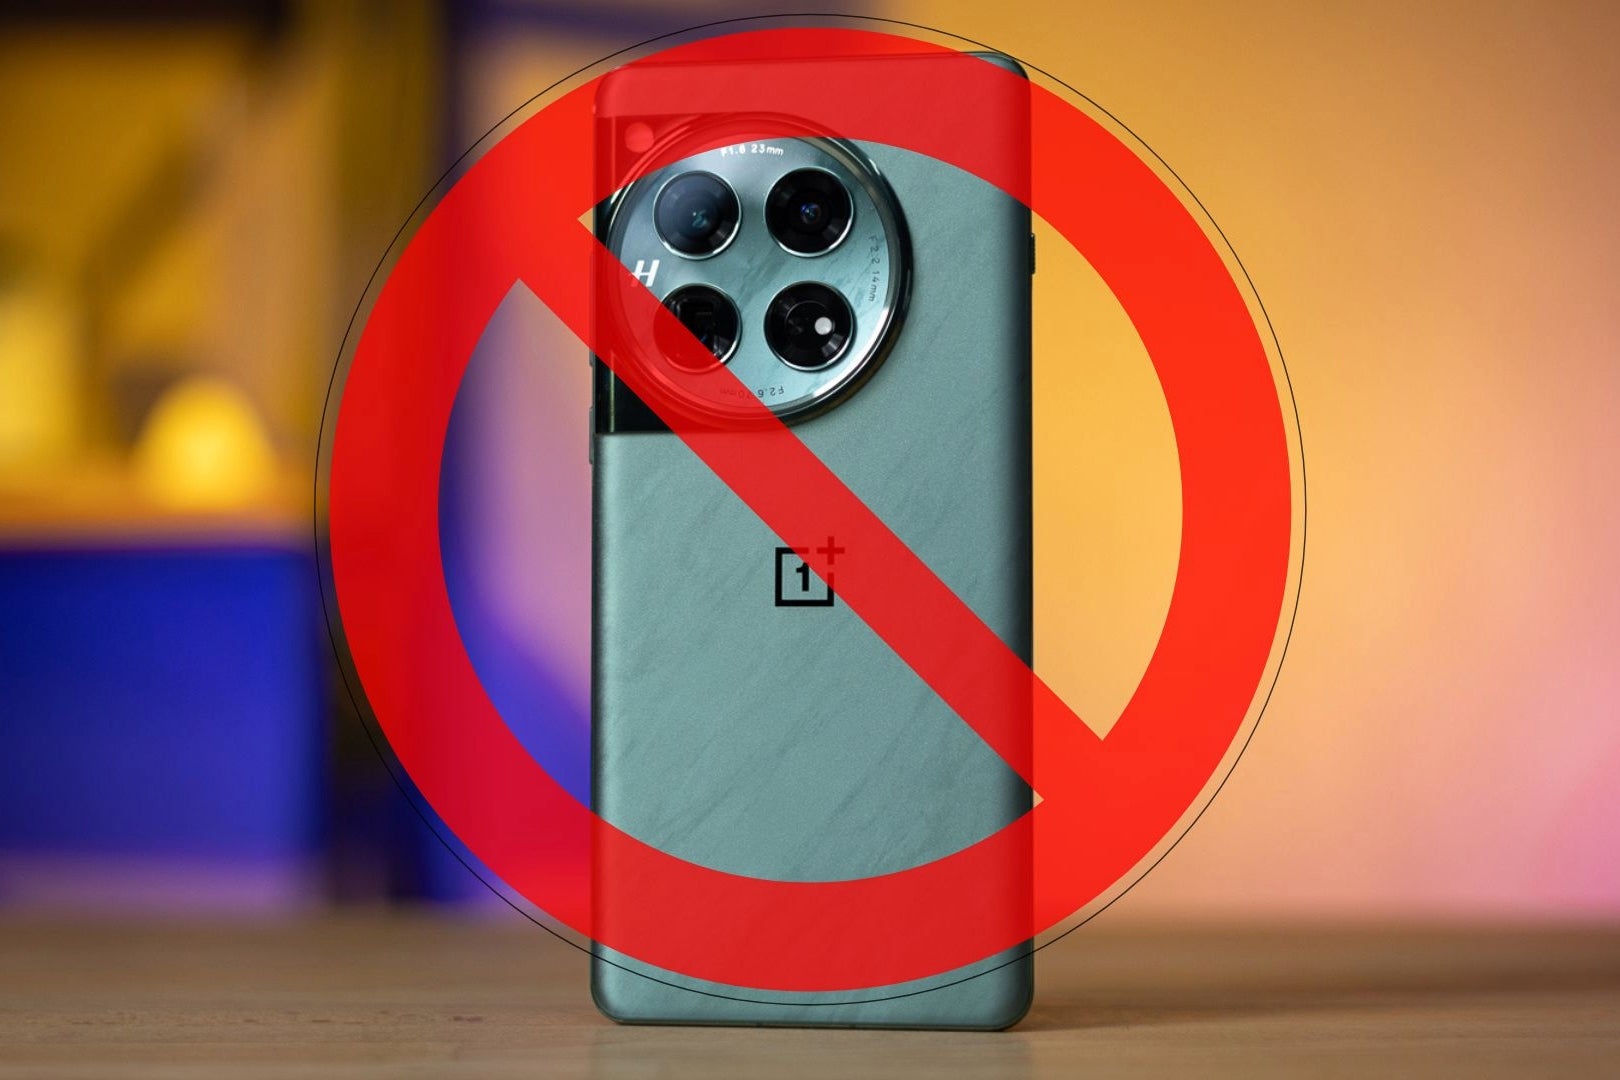 No shops, no sales? How could a OnePlus ban affect the company in India